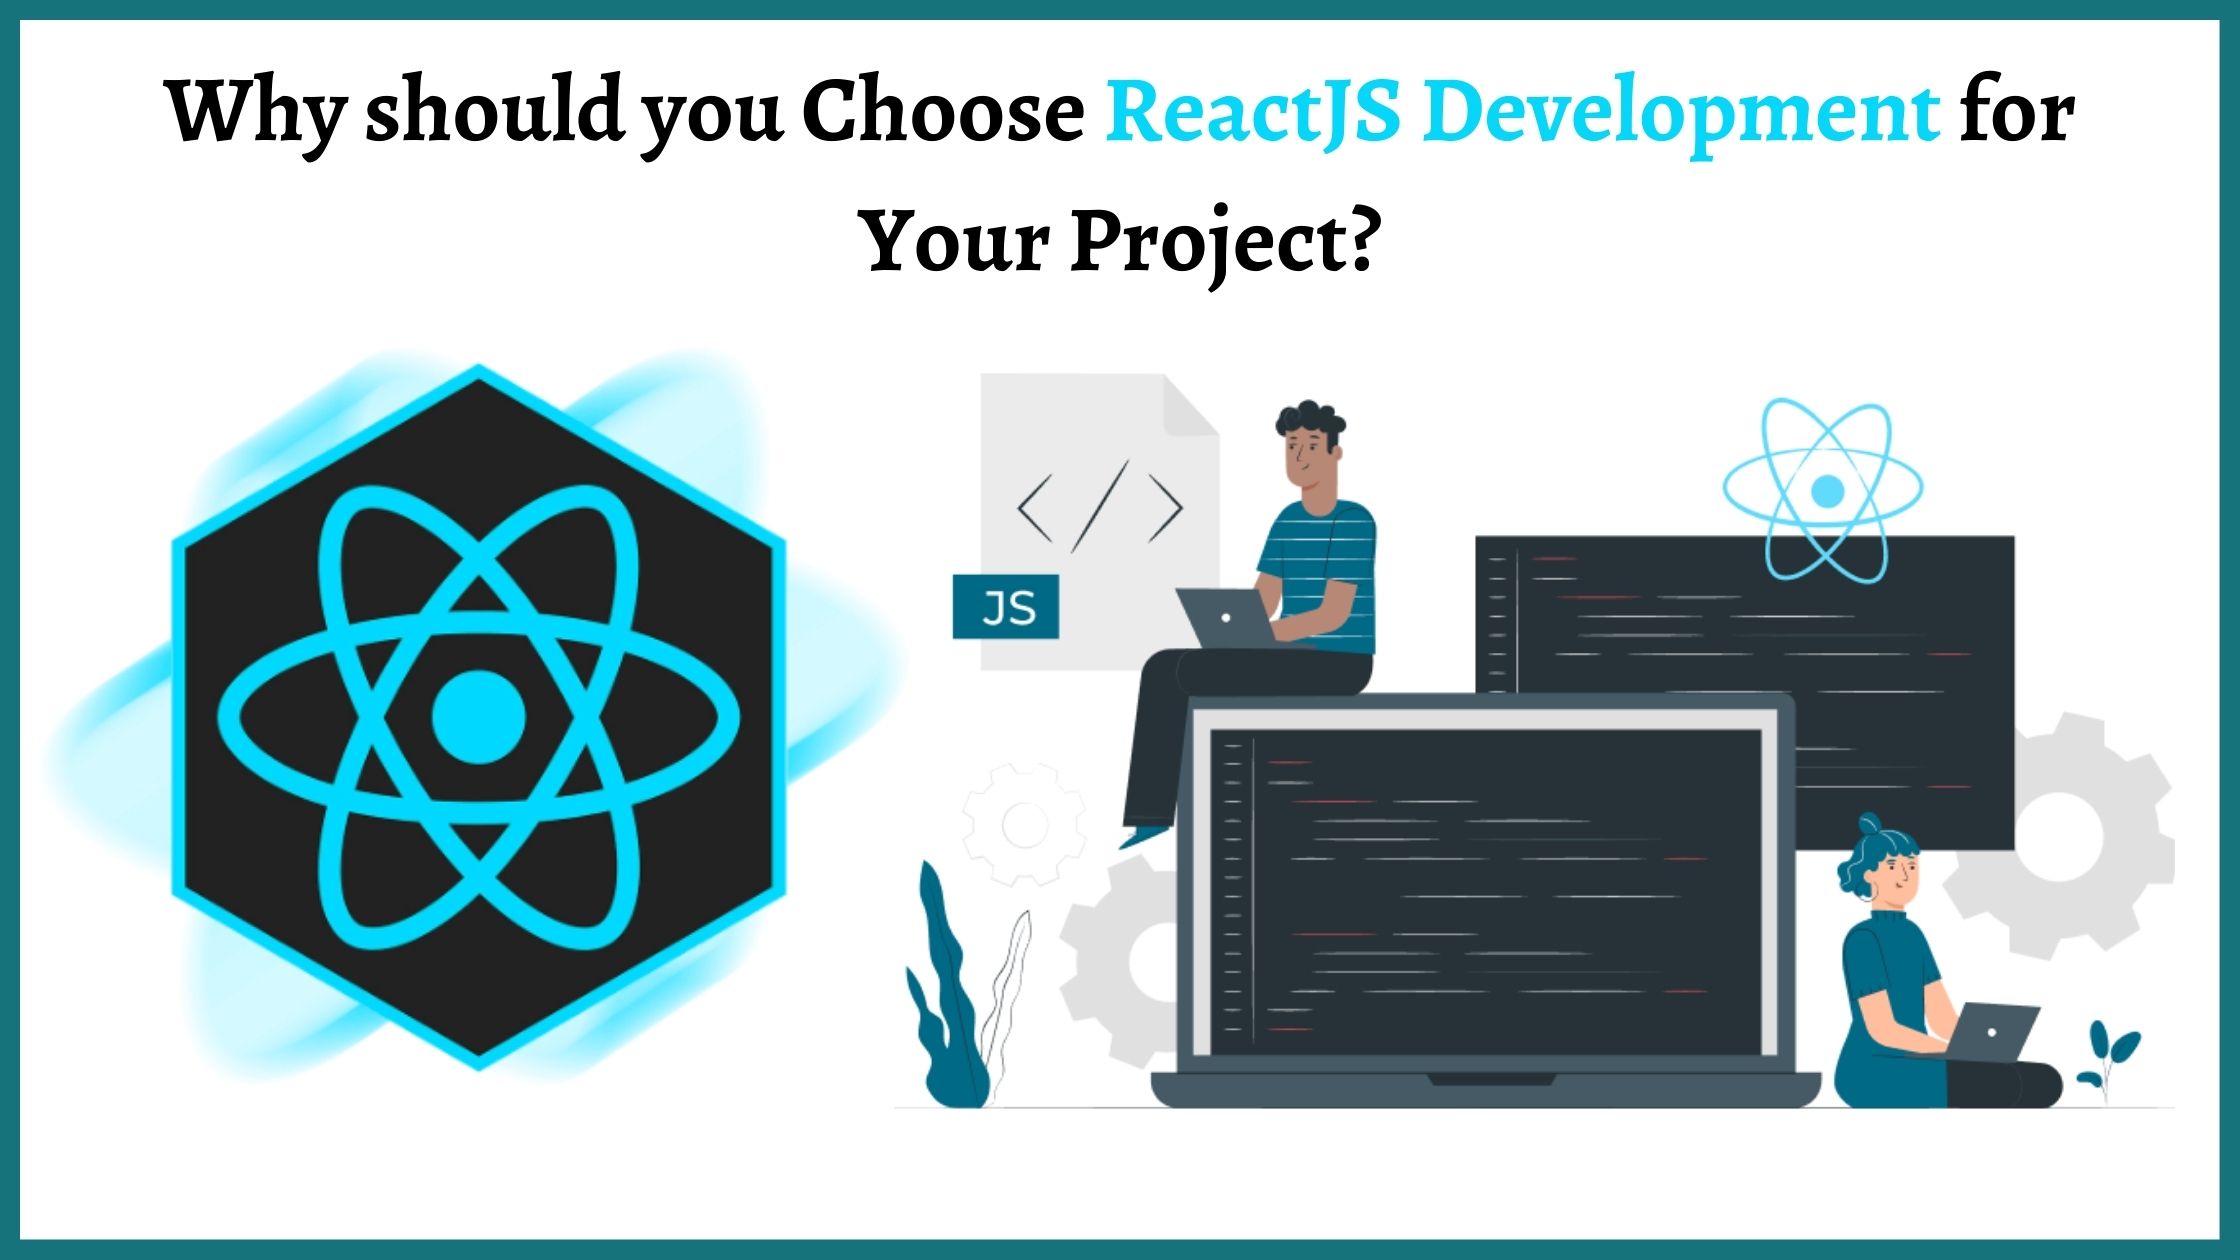 Why Should You Choose ReactJS Development For Your Project?